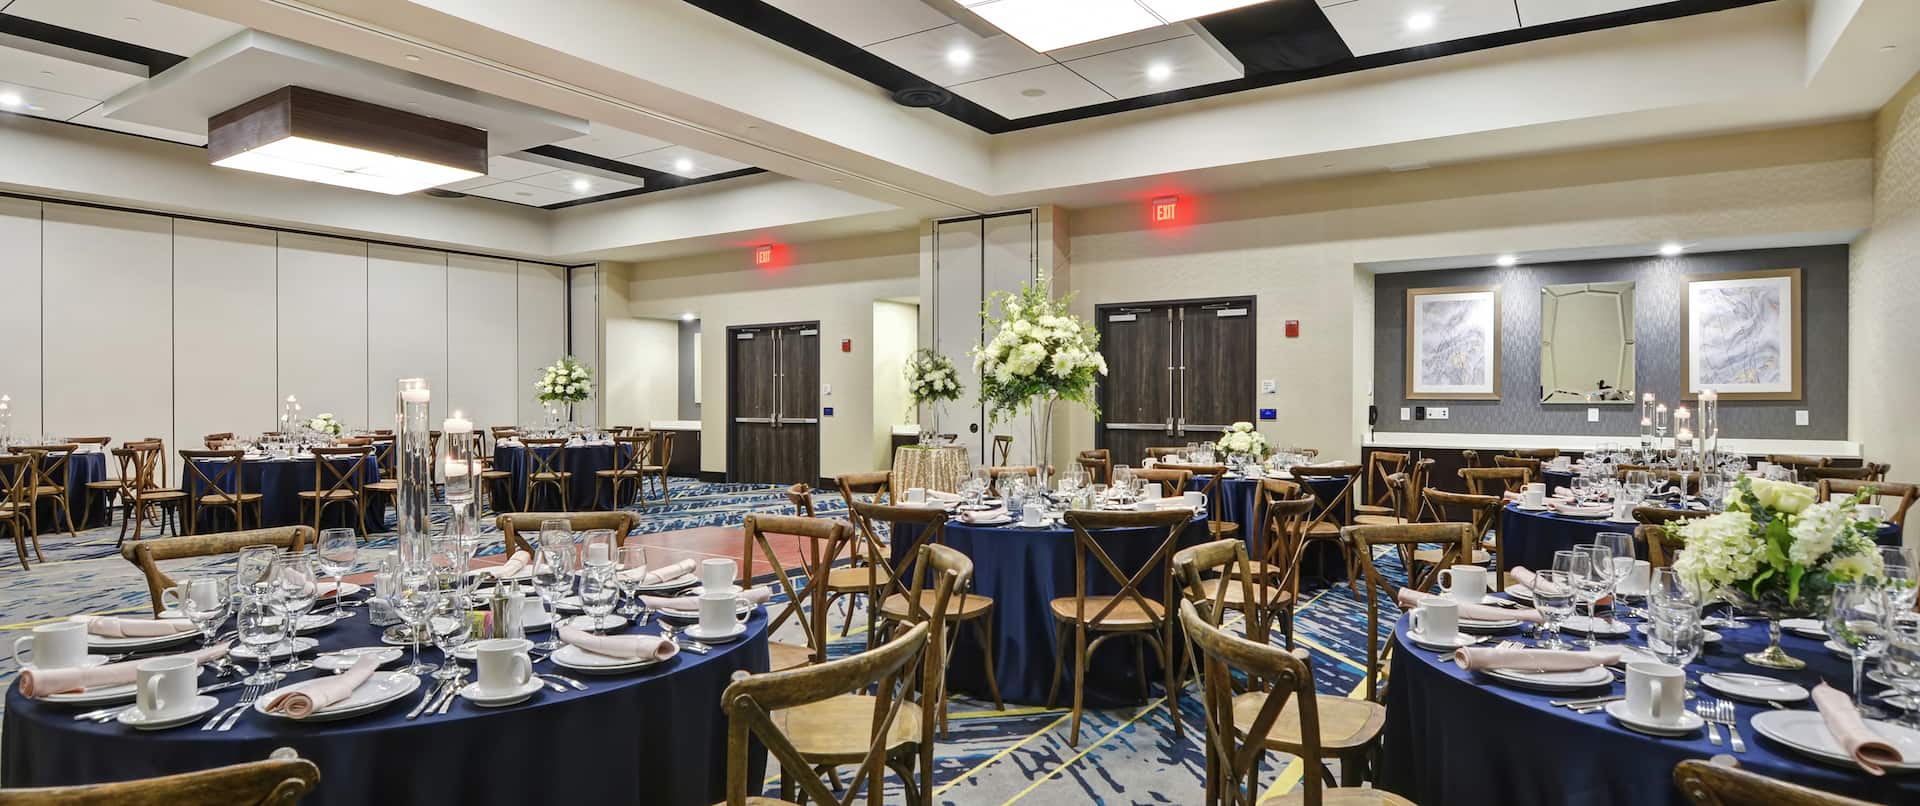 Hotel Ballroom with round tables and chairs